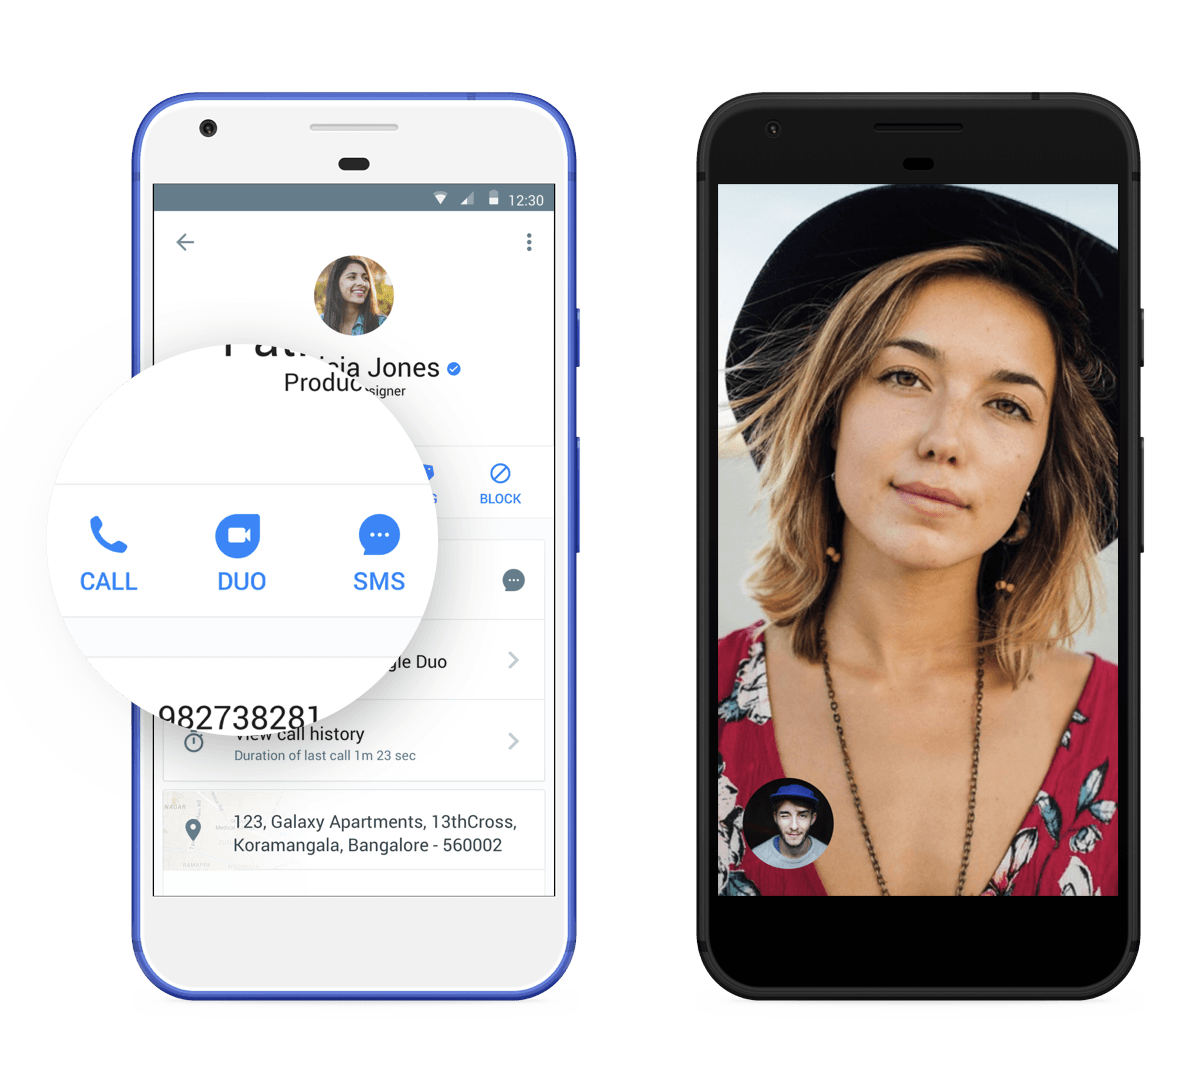 Truecaller today announced a strategic agreement to integrate Google Duo, a high-quality video calling service, within the Truecaller app.